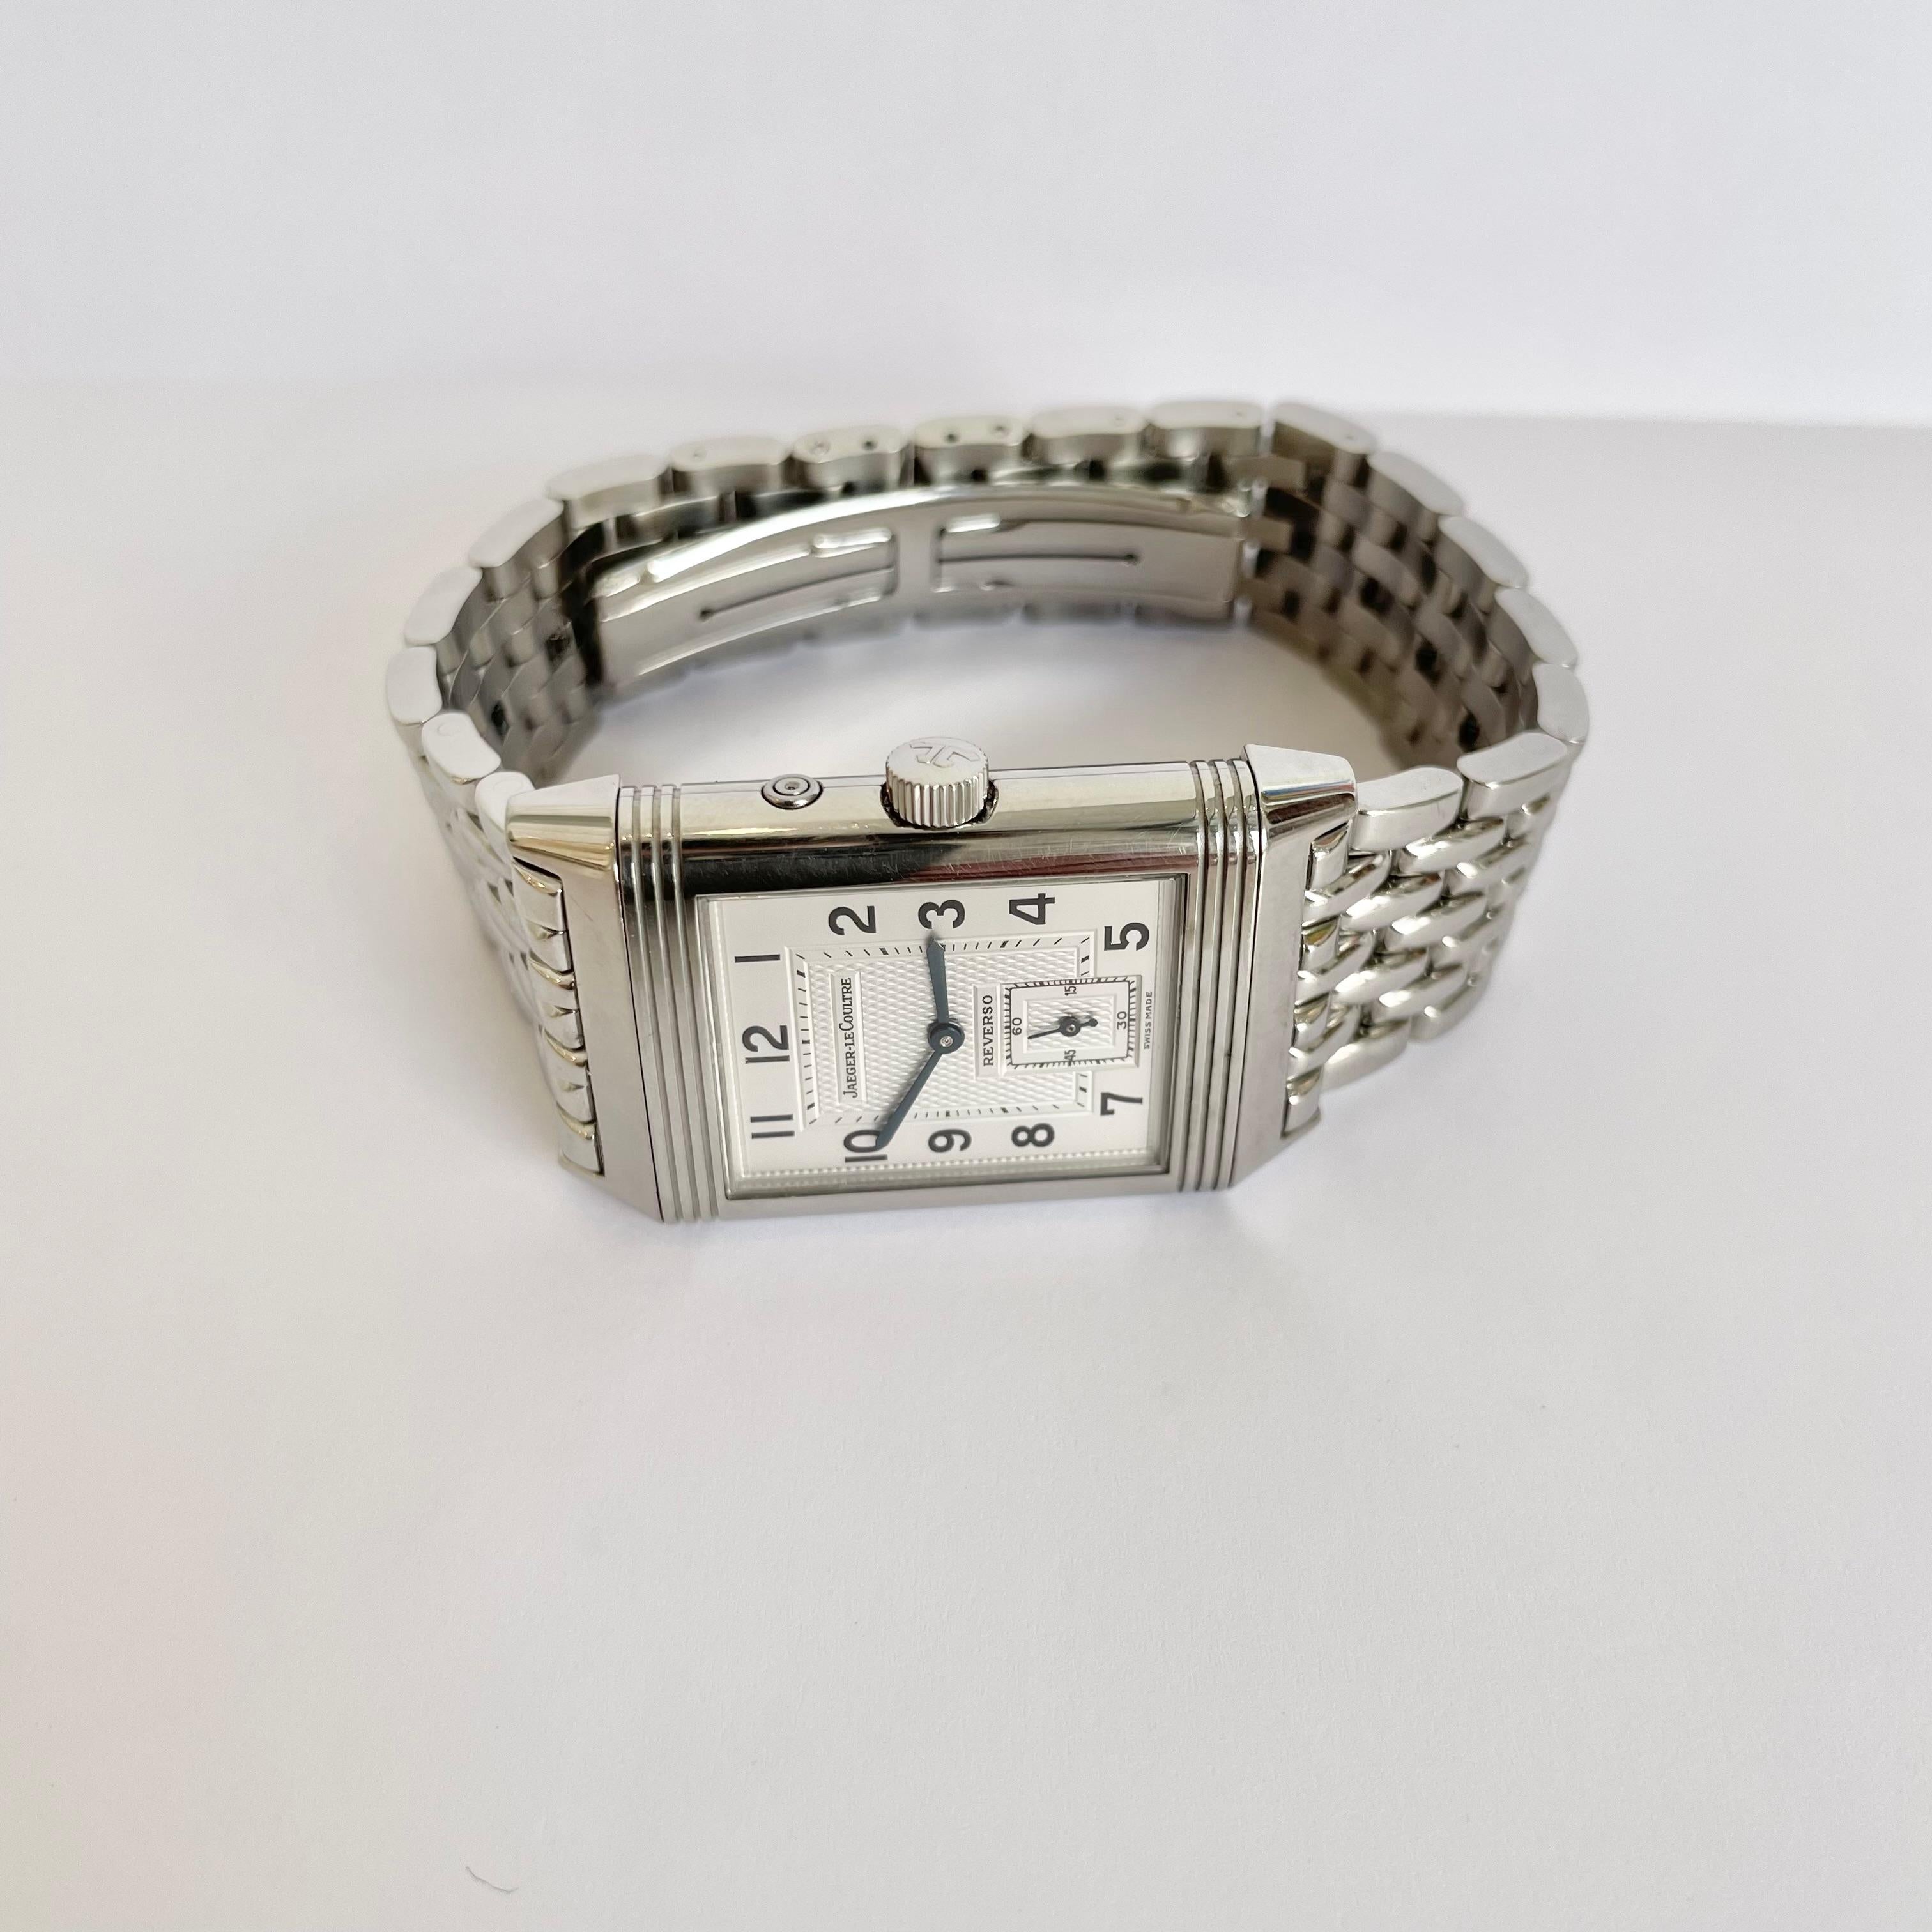 Elegant Jaeger-LeCoultre stainless steel Reverso wrist watch with a silver guilloché dial and a dark charcoal dial opposite. Manual, self-winding and water resistant up to 30 meters. A perfectly designed style with a link bracelet and clasp closure.